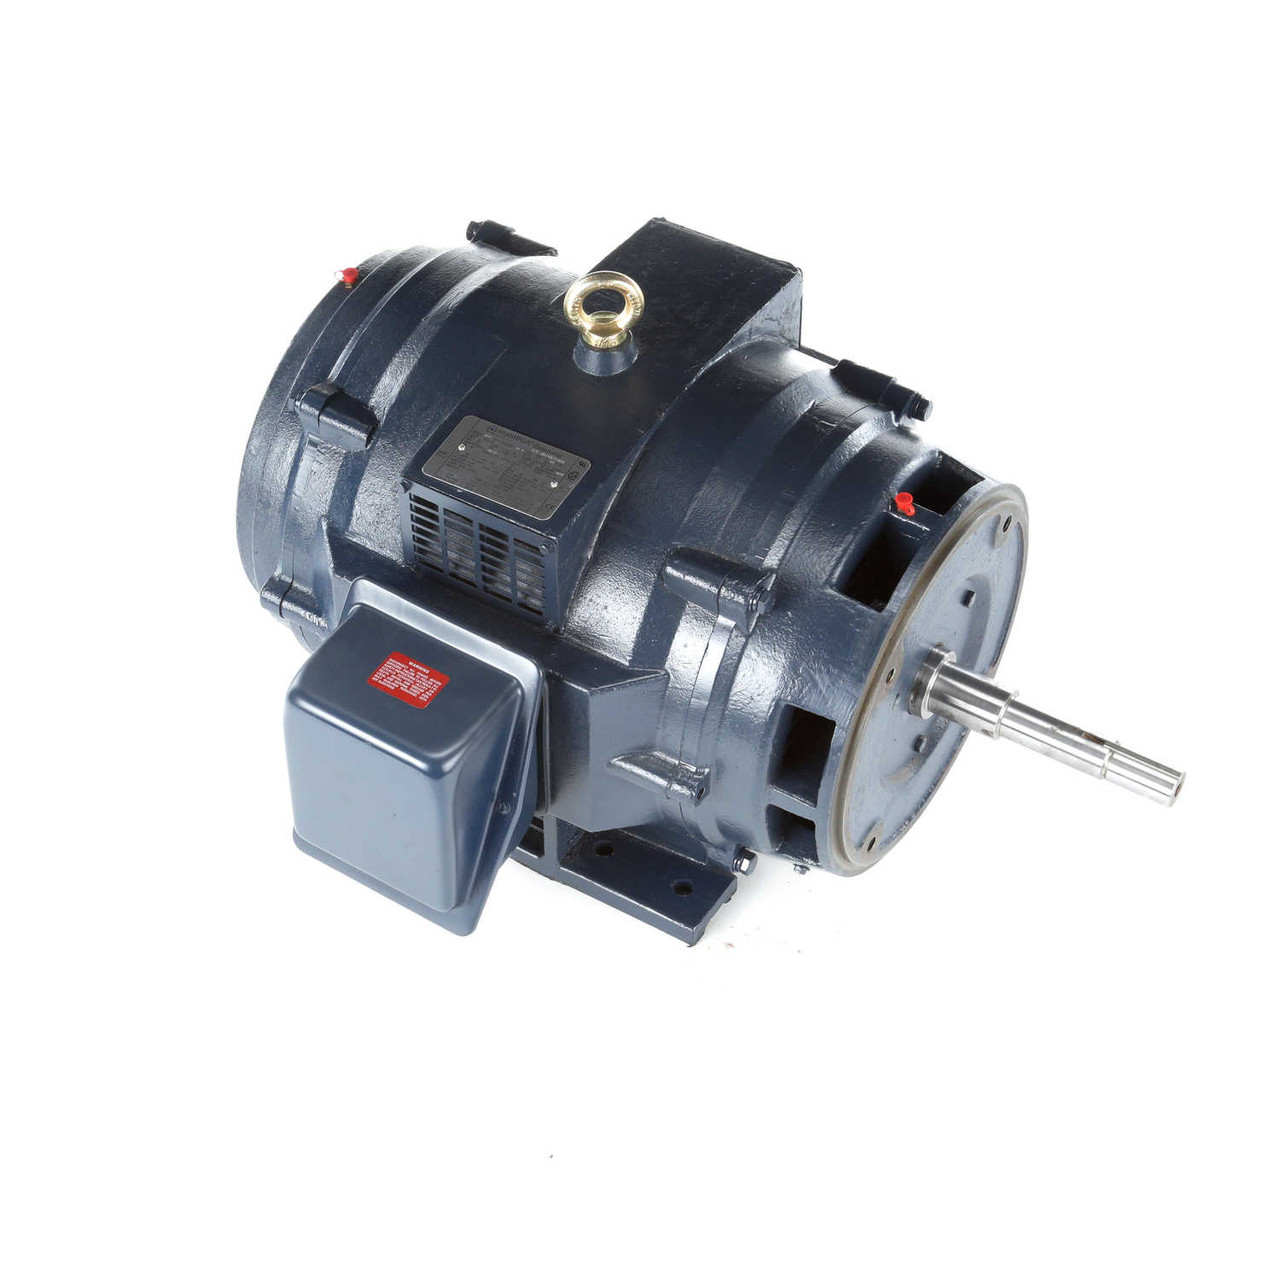 GT2434 JP Close-Coupled Pump Three Phase Dripproof Motor 40 HP